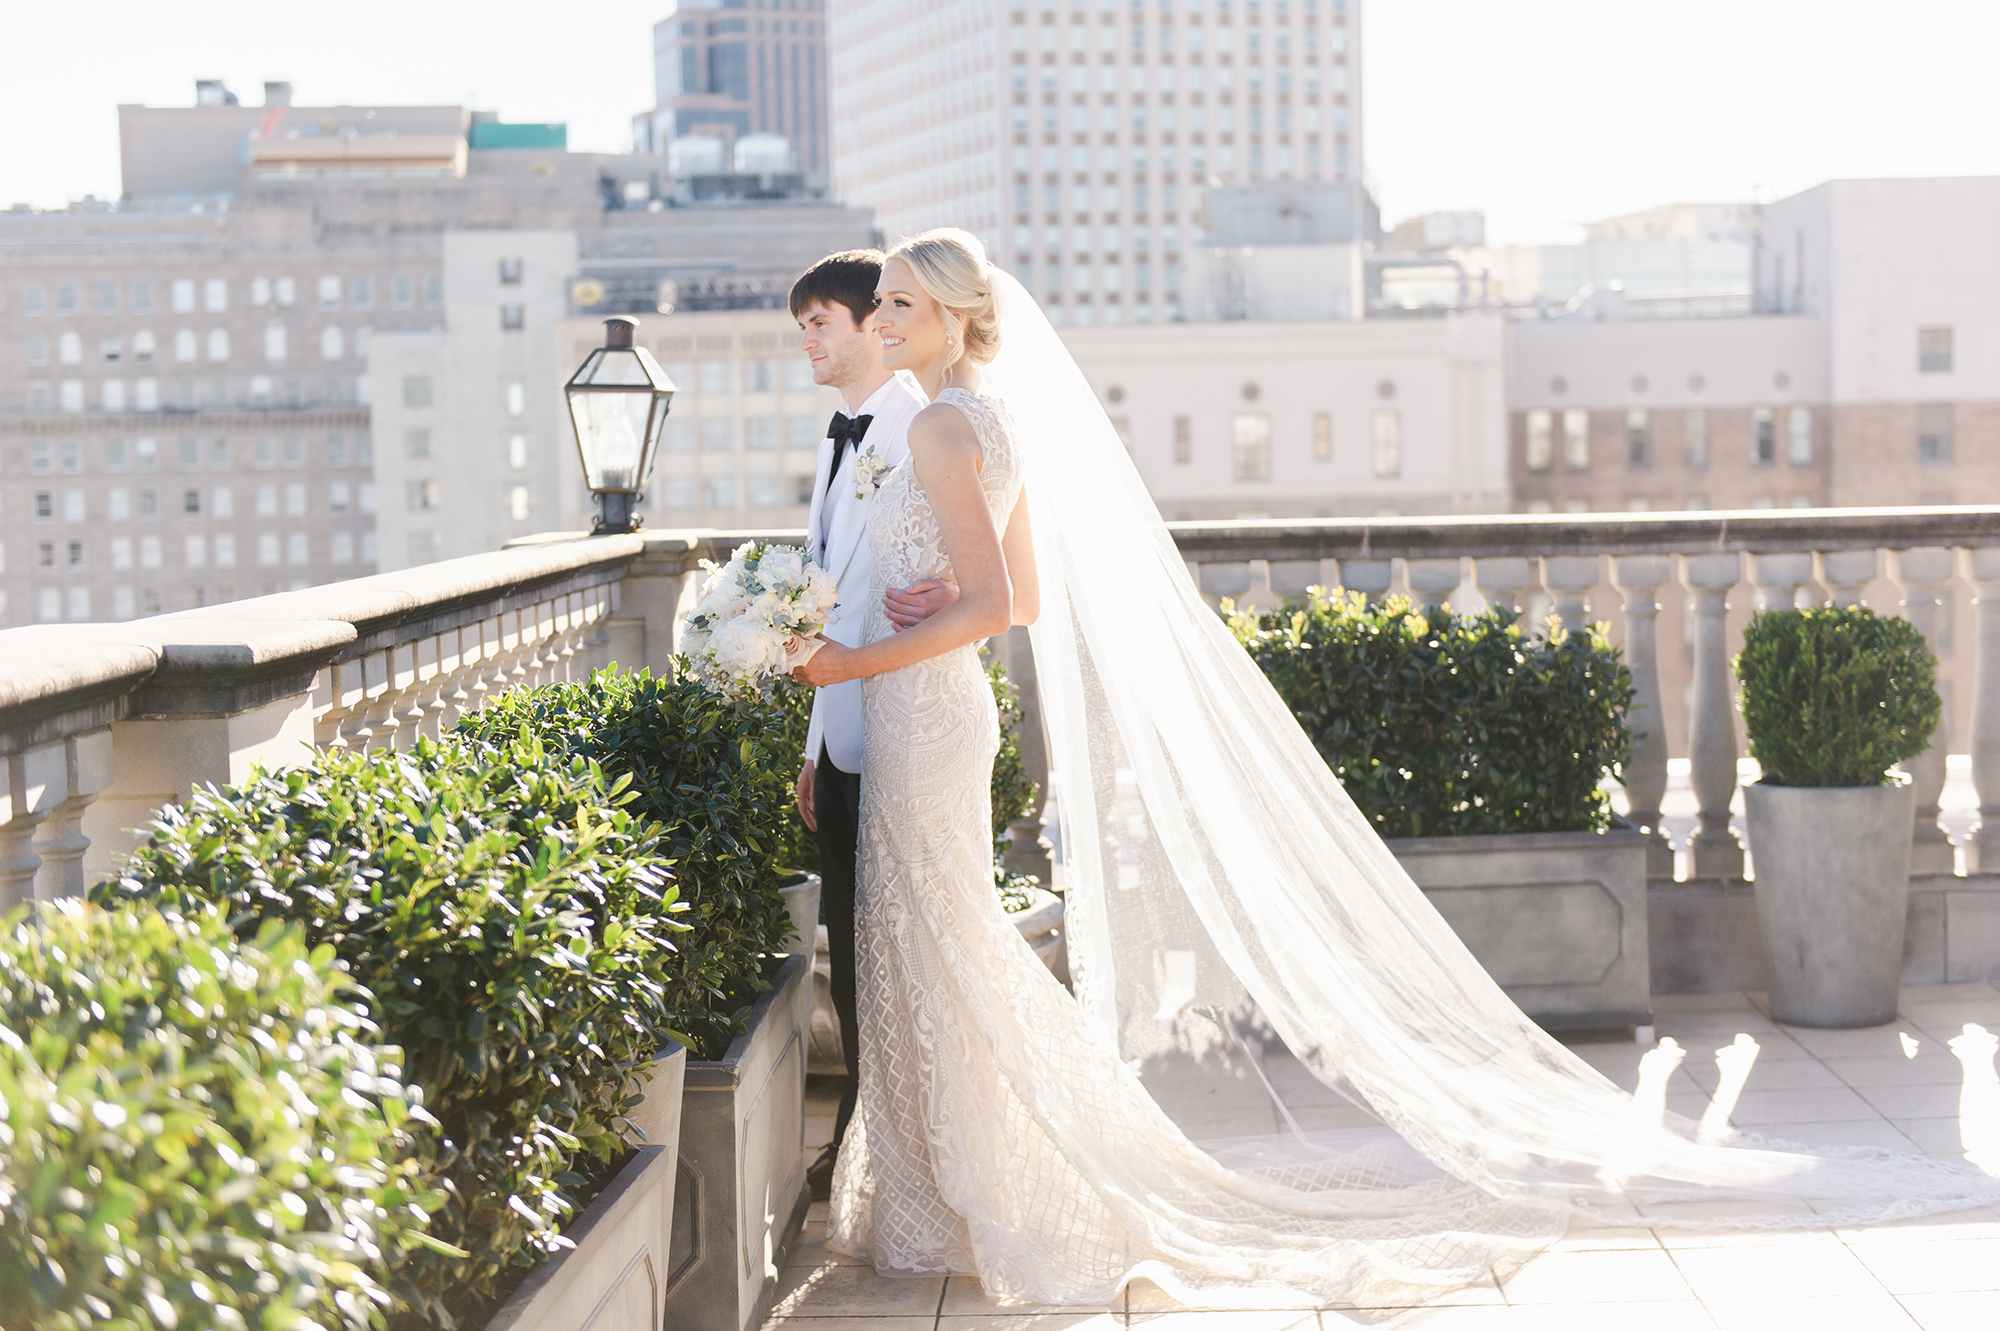 Bride and groom on rooftop